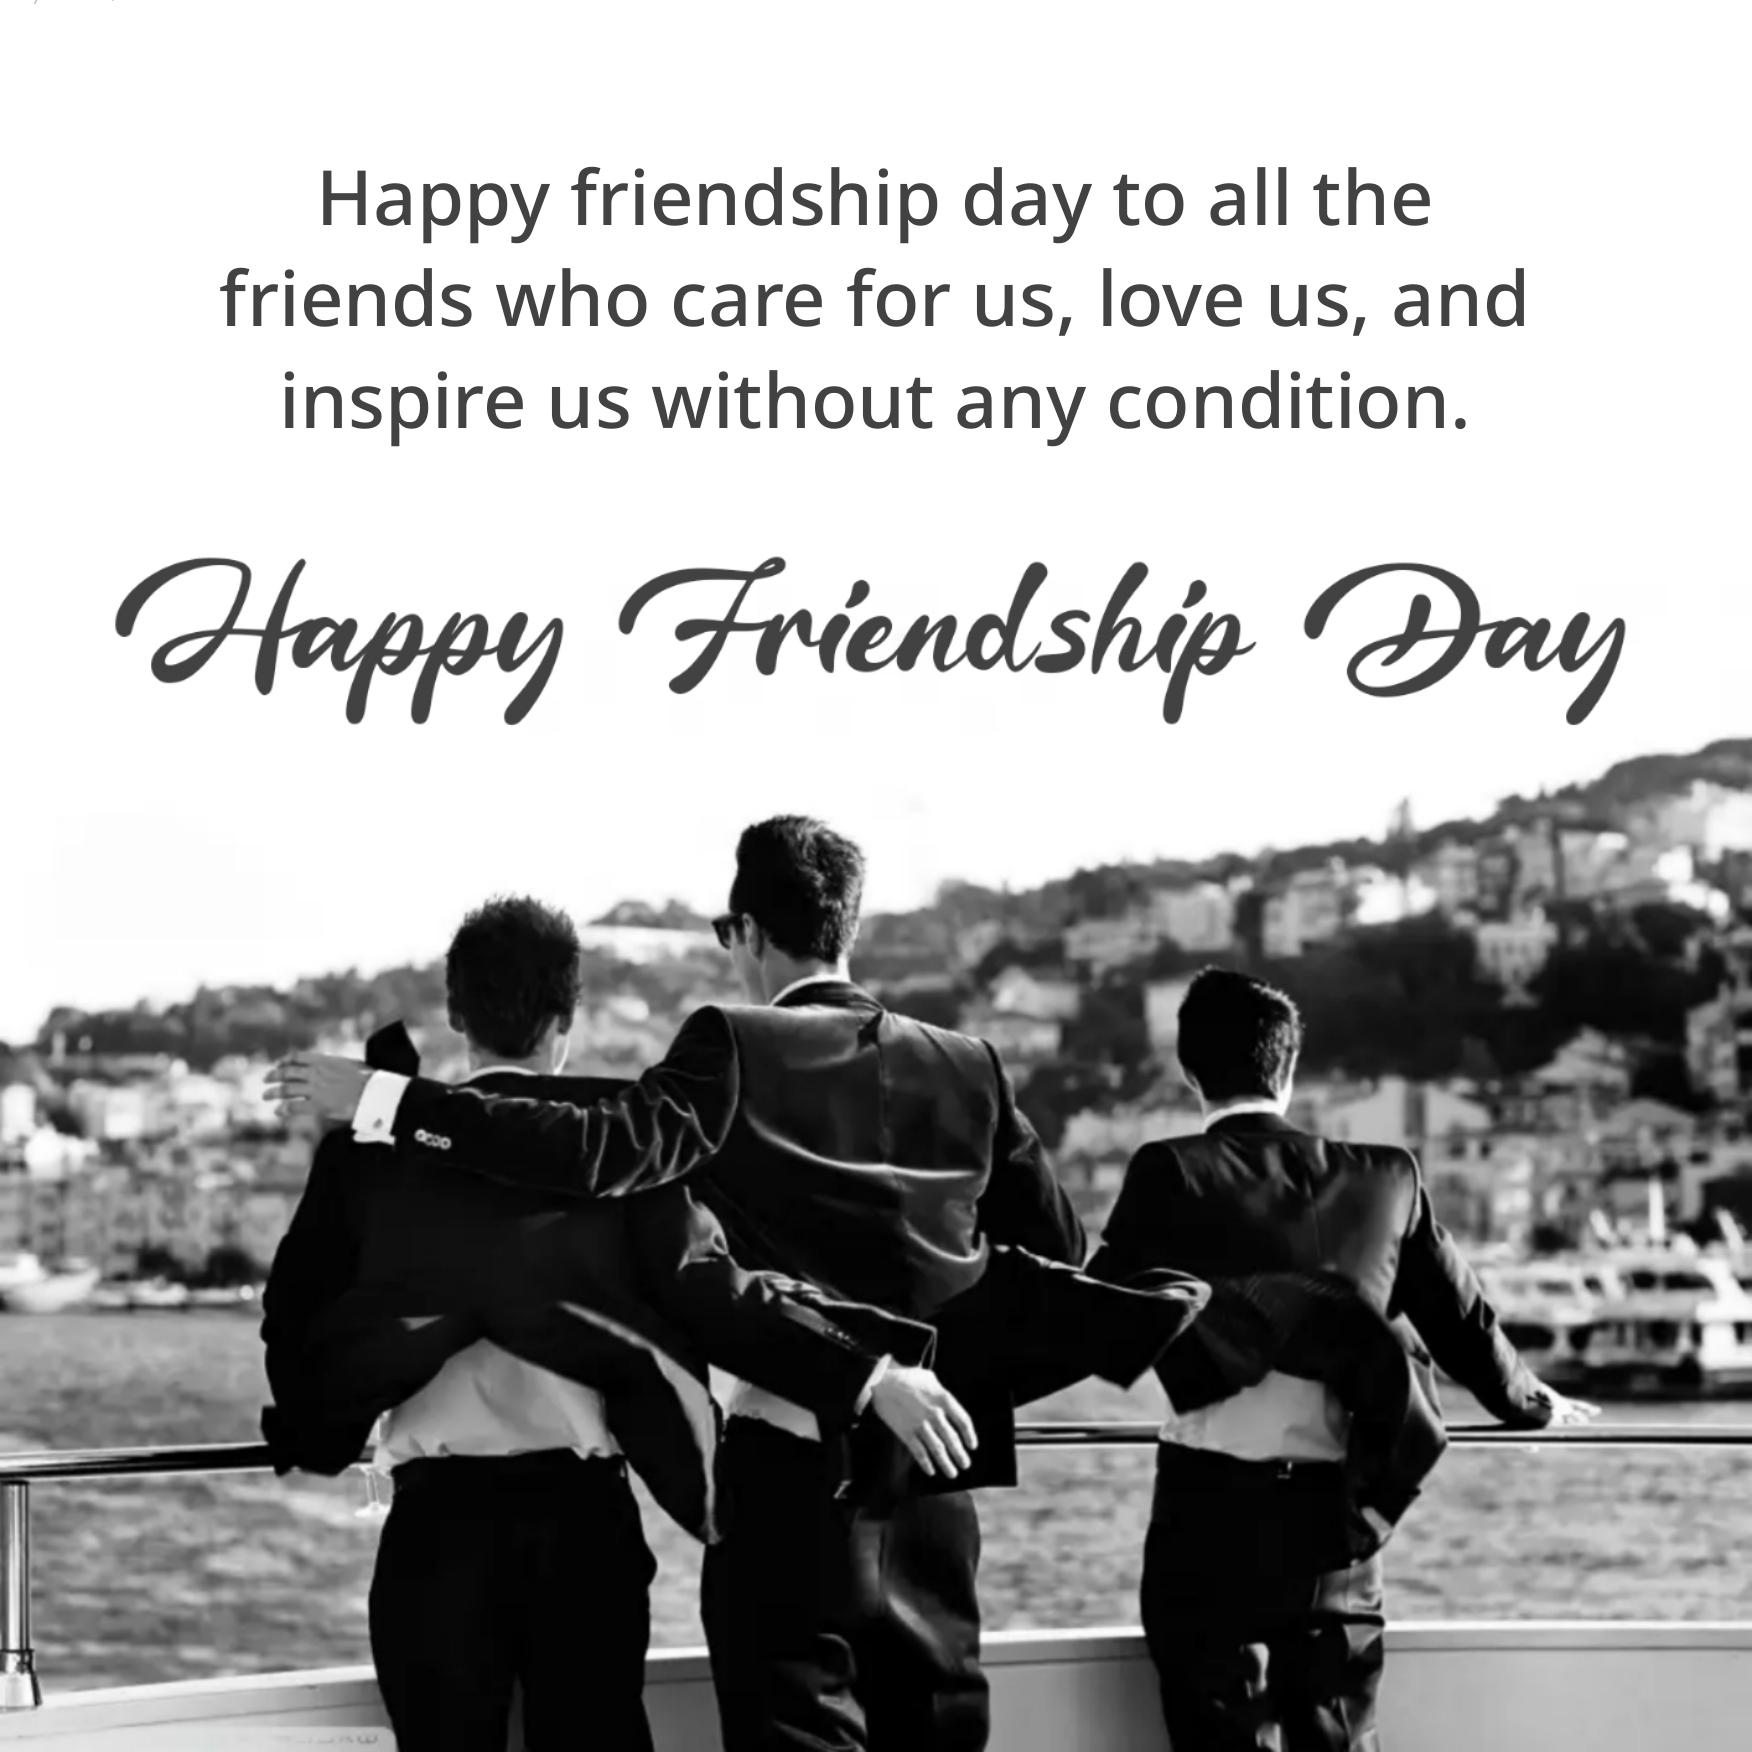 Happy friendship day to all the friends who care for us